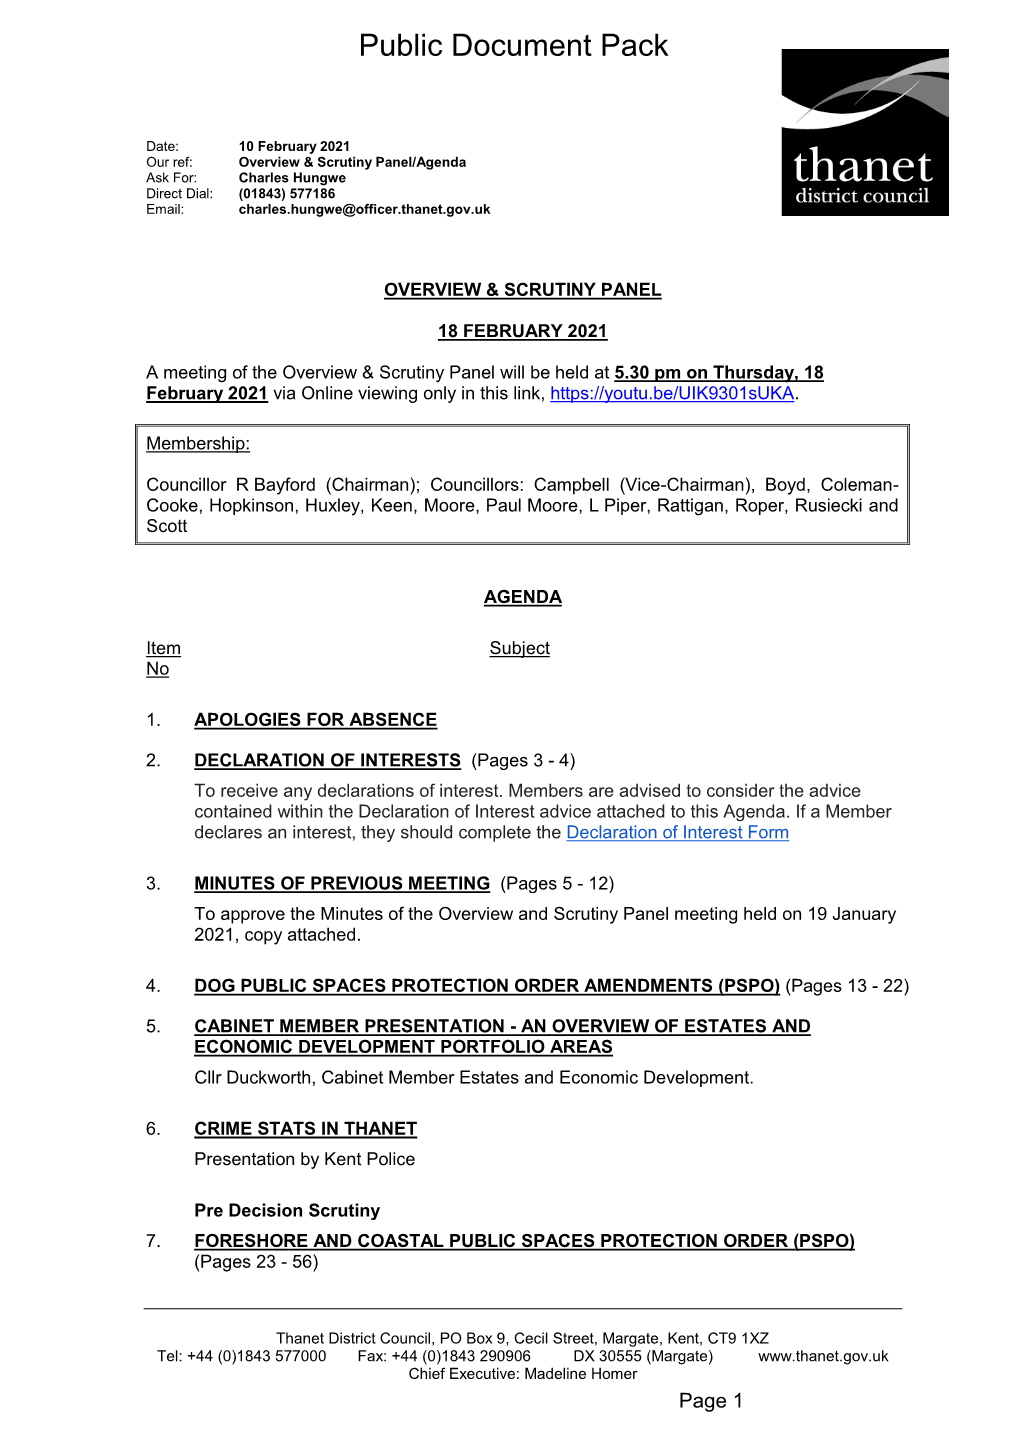 (Public Pack)Agenda Document for Overview & Scrutiny Panel, 18/02